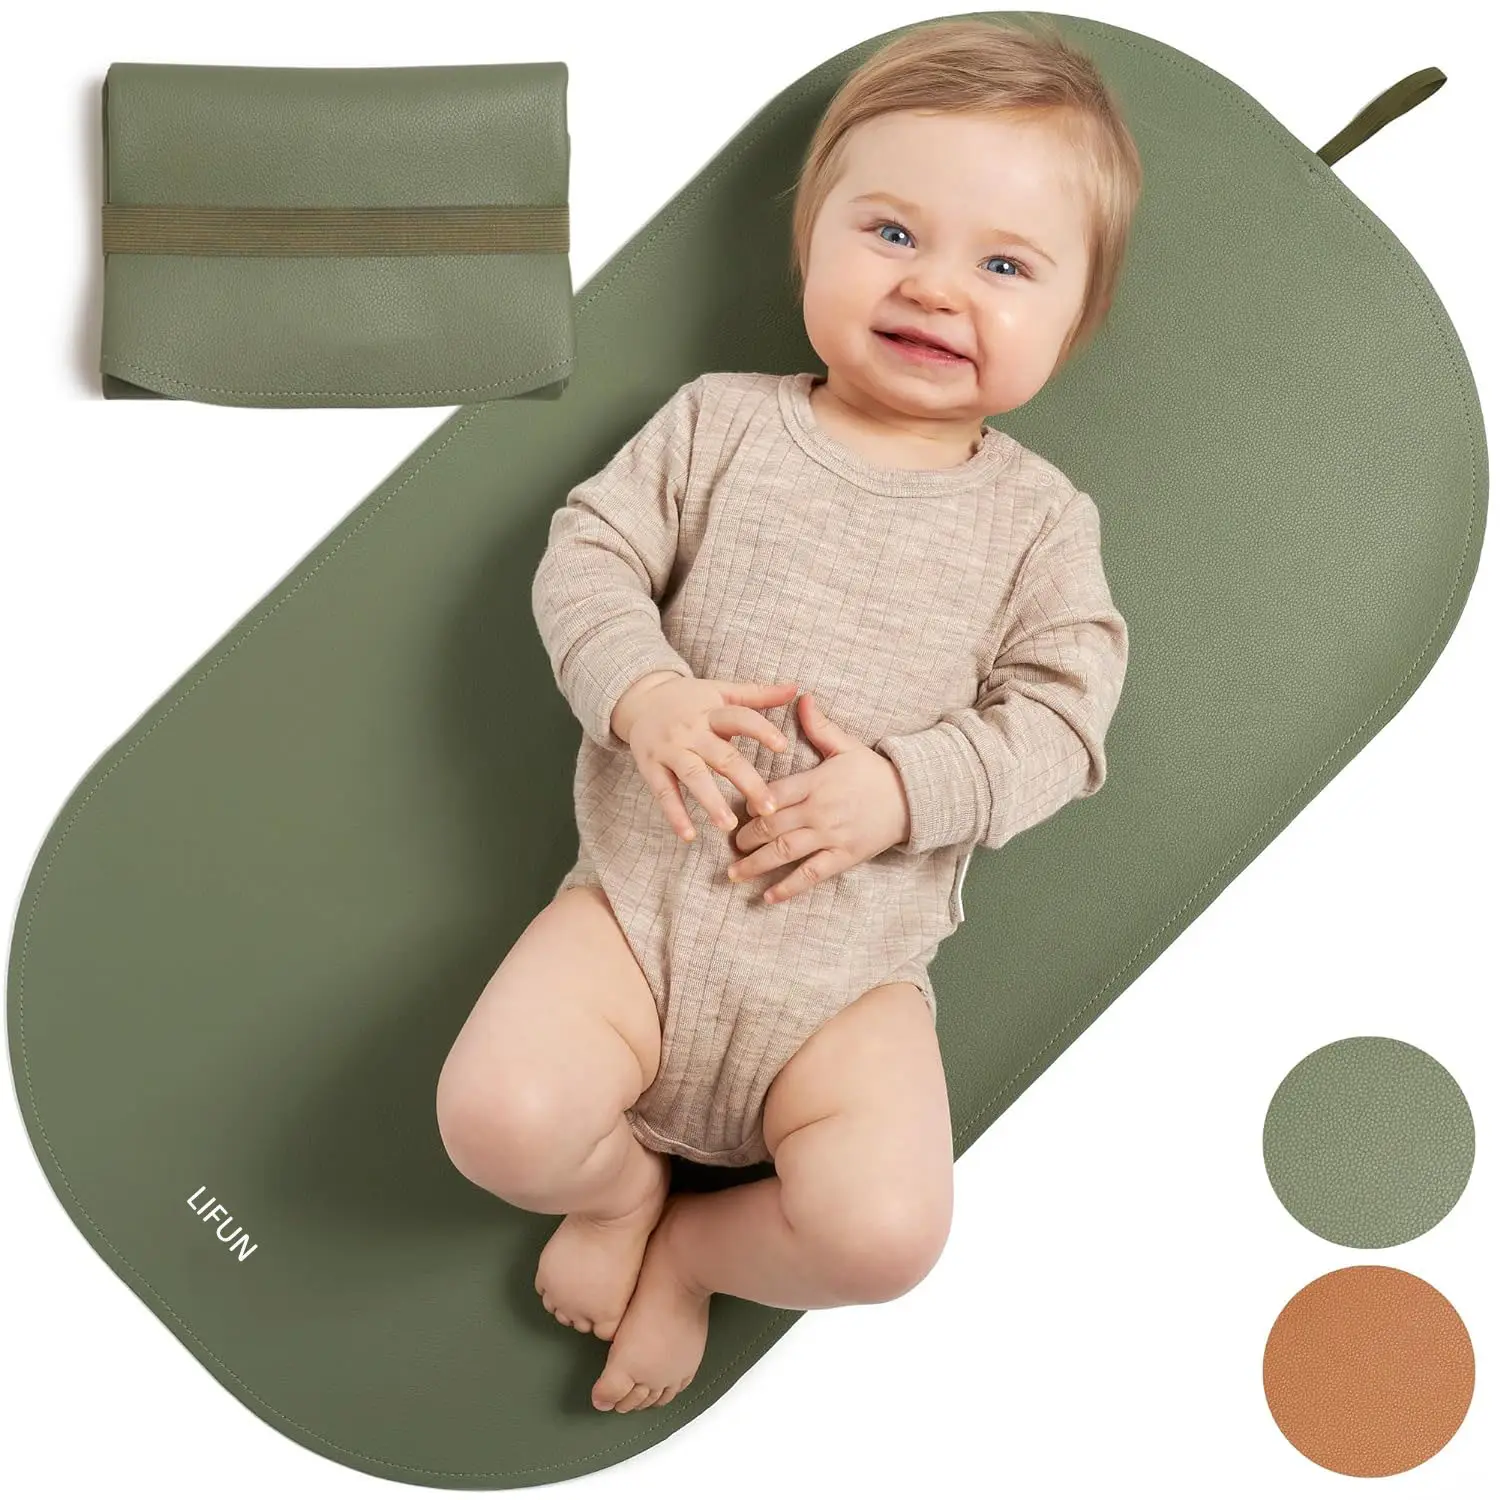 Portable Baby Diaper Changing Mat  Soft and Easy to Wipe Vegan Leather Changing Pad  Lightweight and Foldable Mat